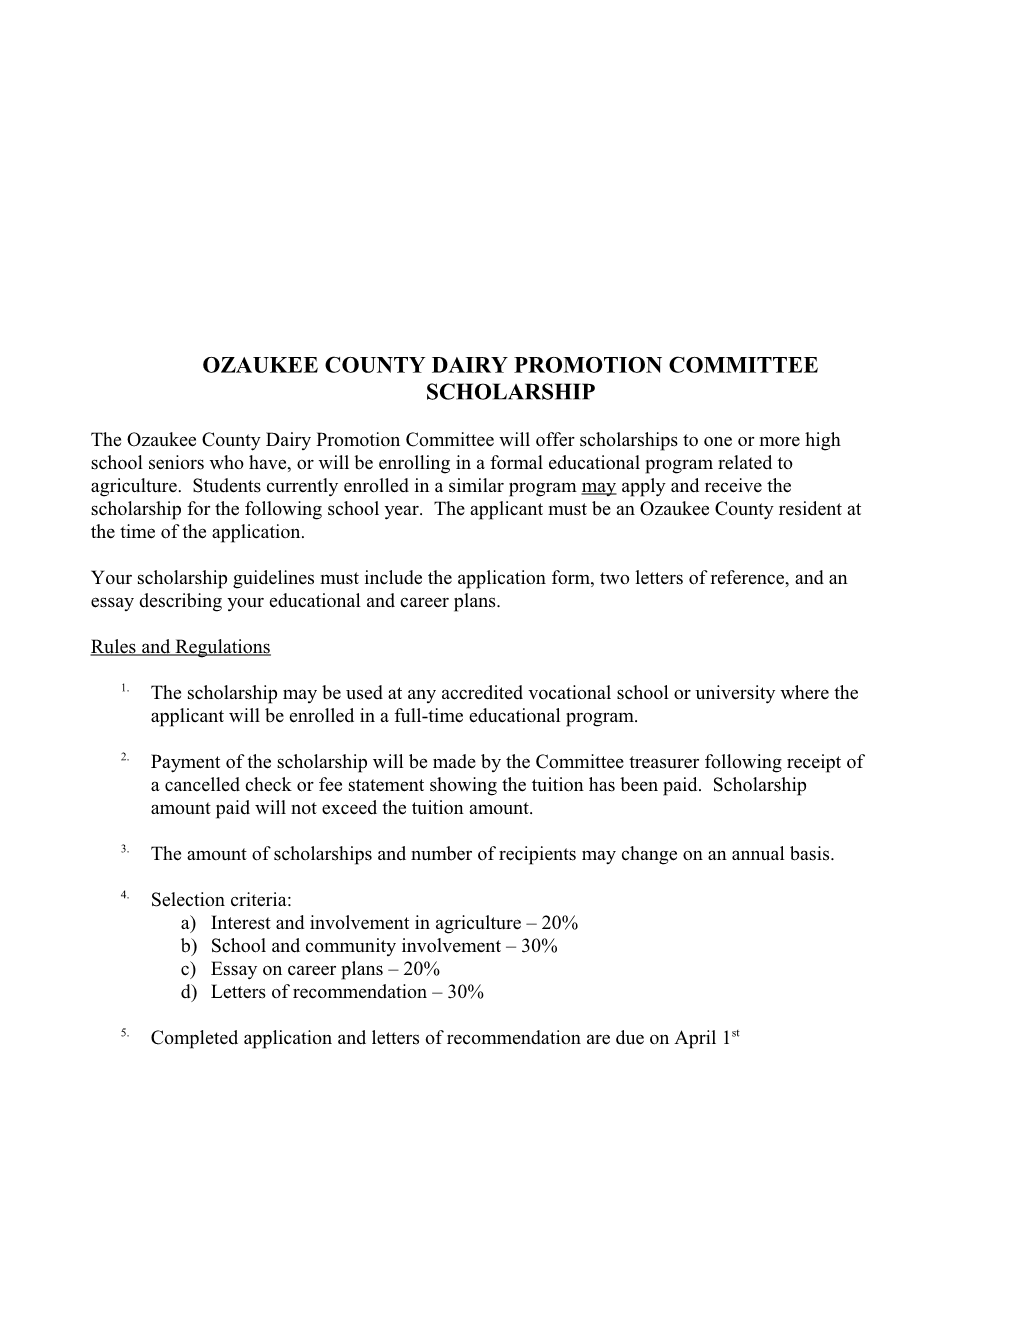 Ozaukee County Dairy Promotion Committee